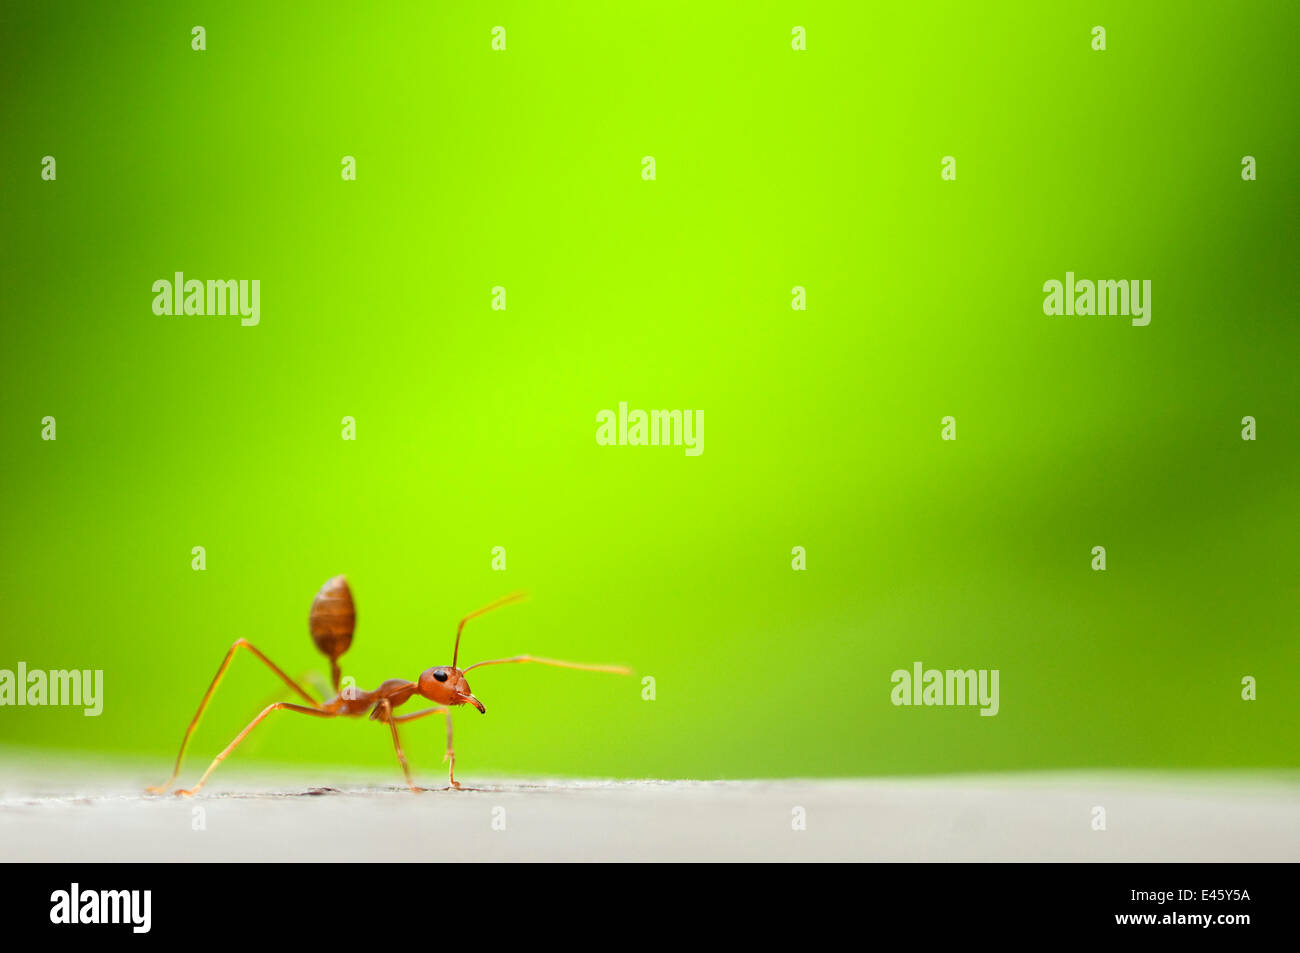 Fire ant (Solenopsis sp) worker, with green plant material behind Stock Photo